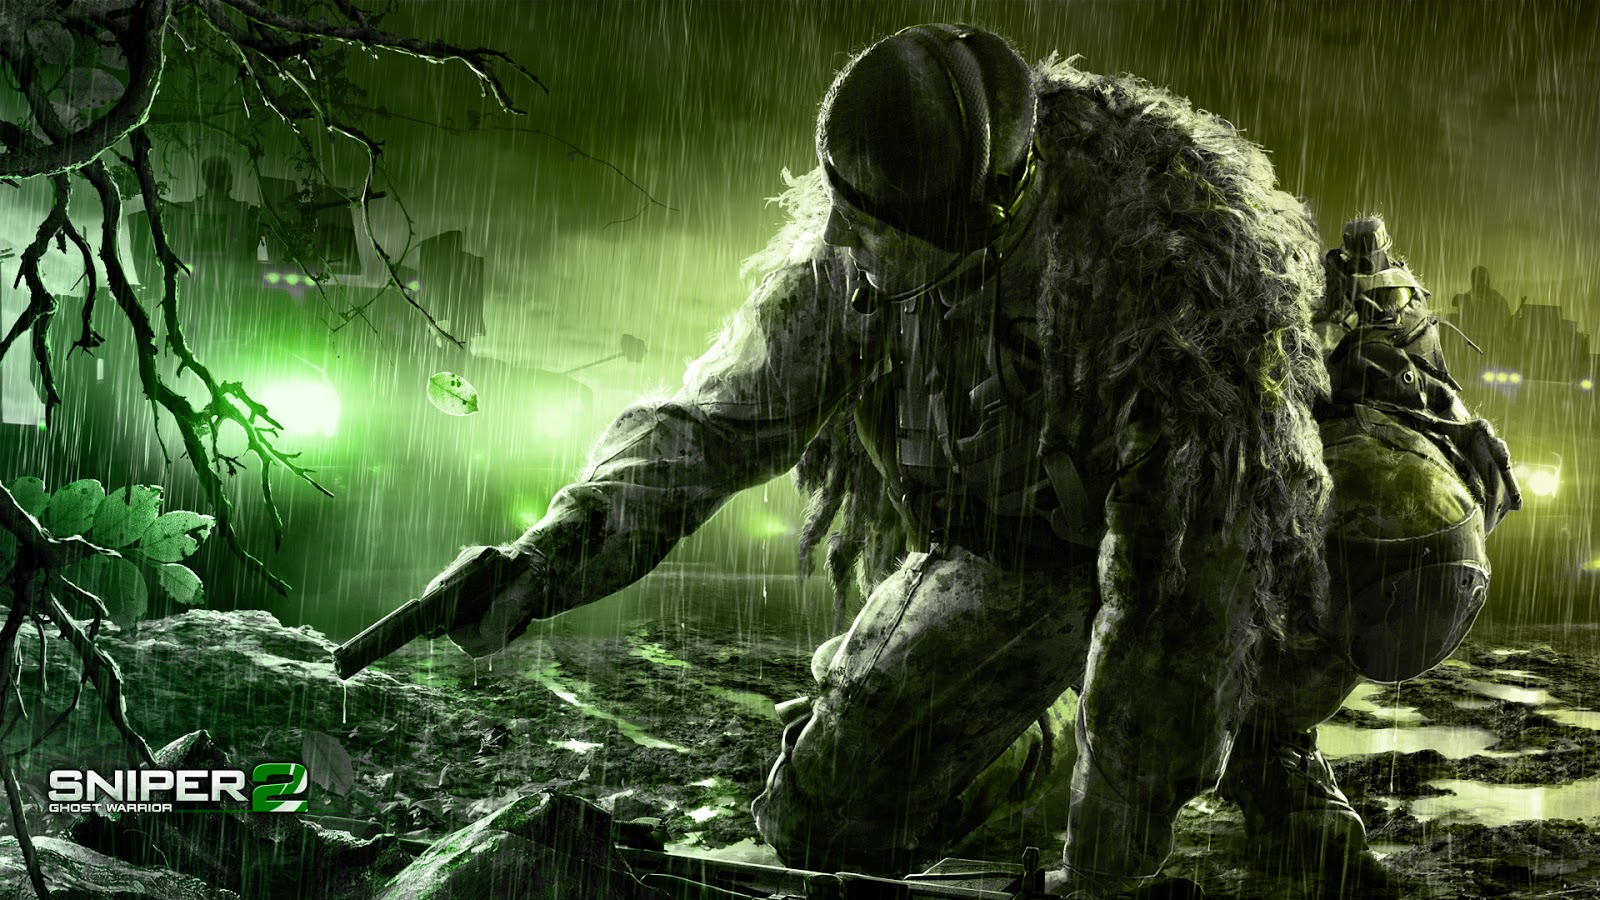 HD WALLPAPERS Sniper Ghost Warrior 2 HD wallpapers 1600x900